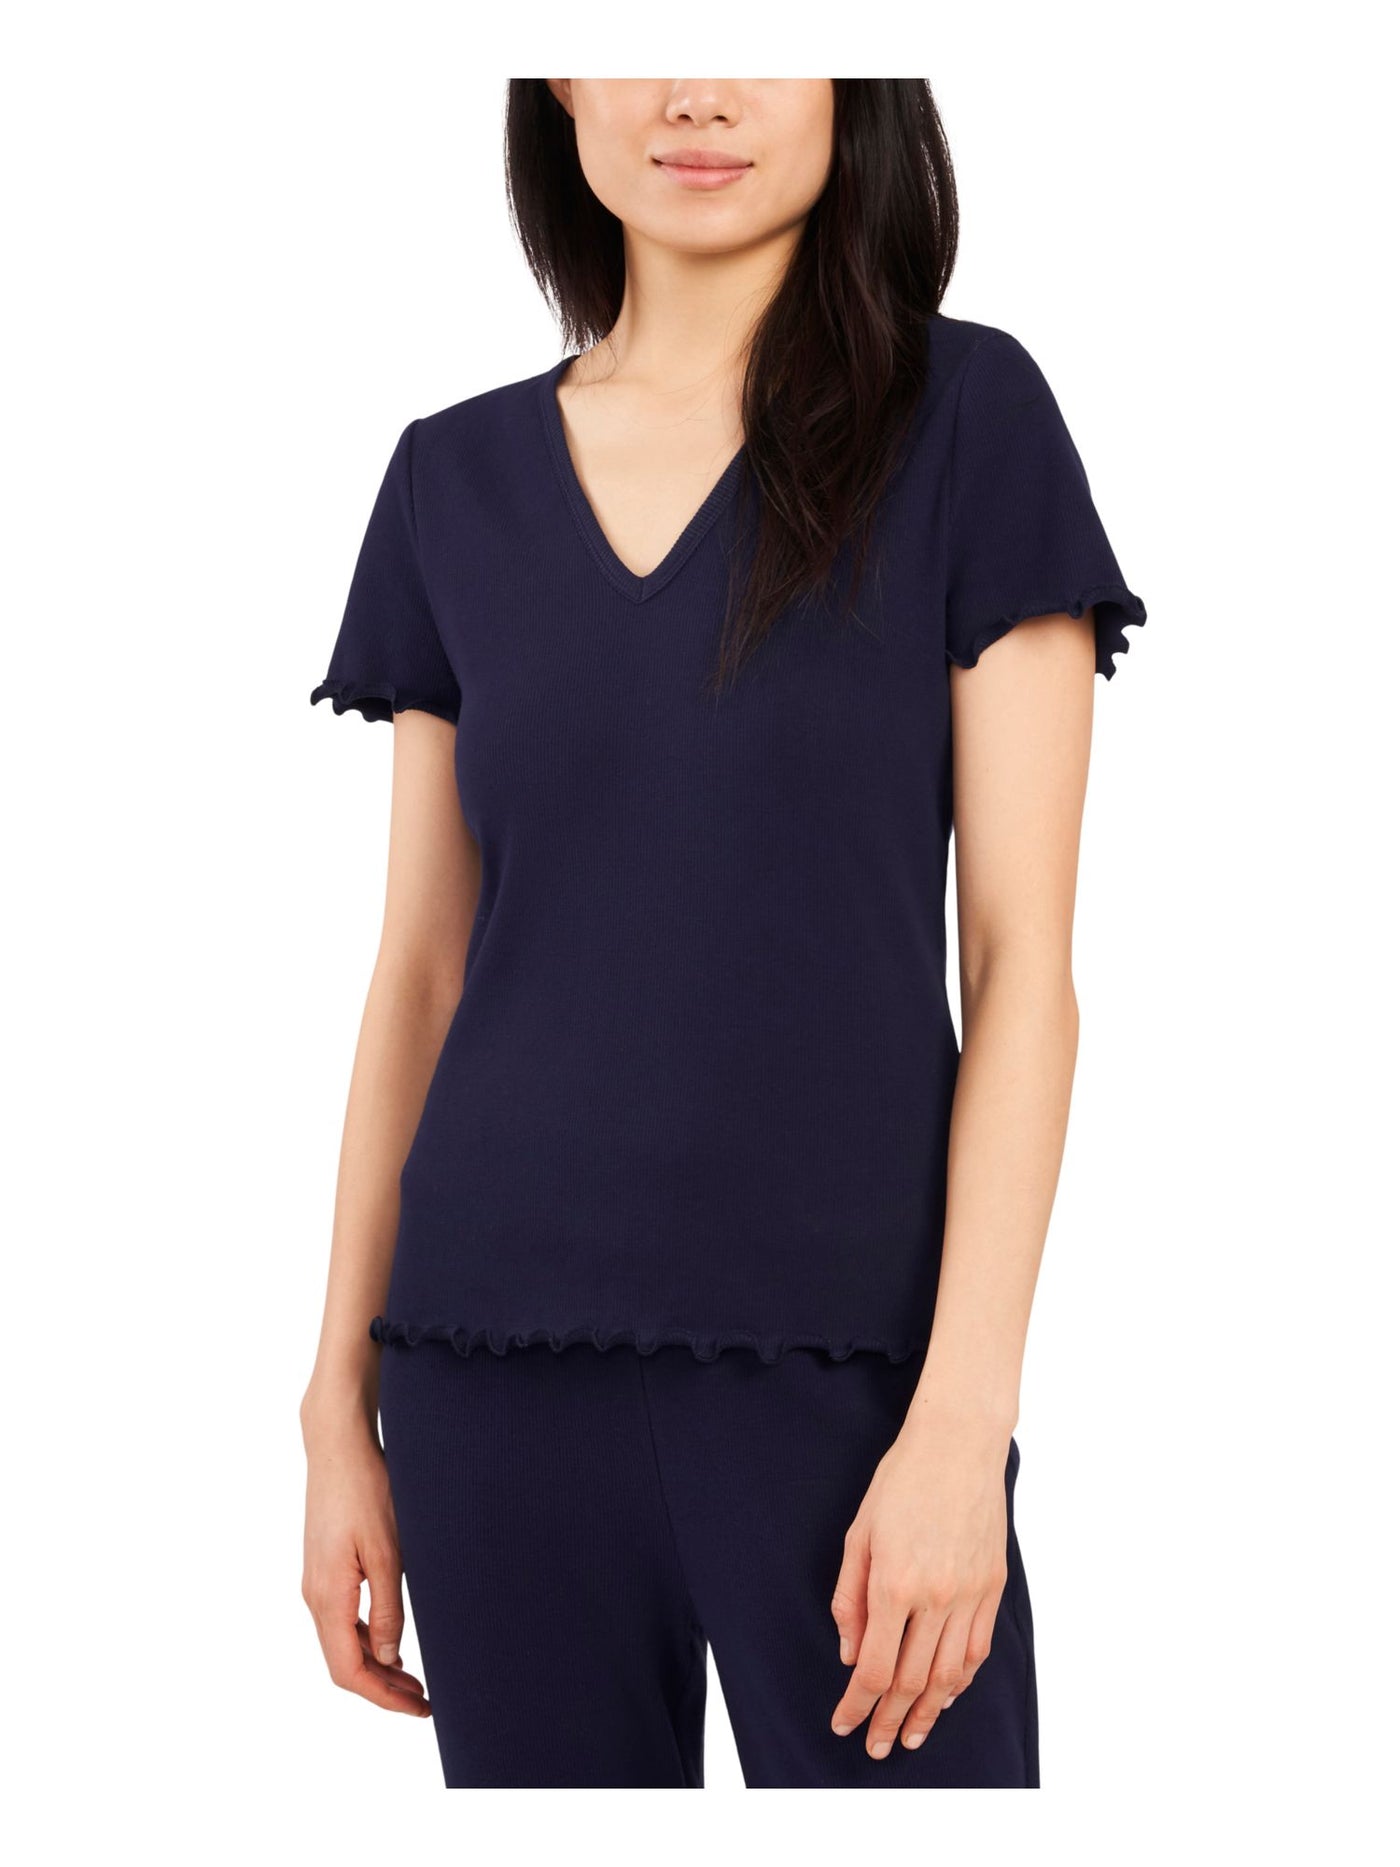 RILEY&RAE Womens Navy Stretch Ribbed Textured Lettuce Edge Cuffs And Hem Short Sleeve V Neck Top M